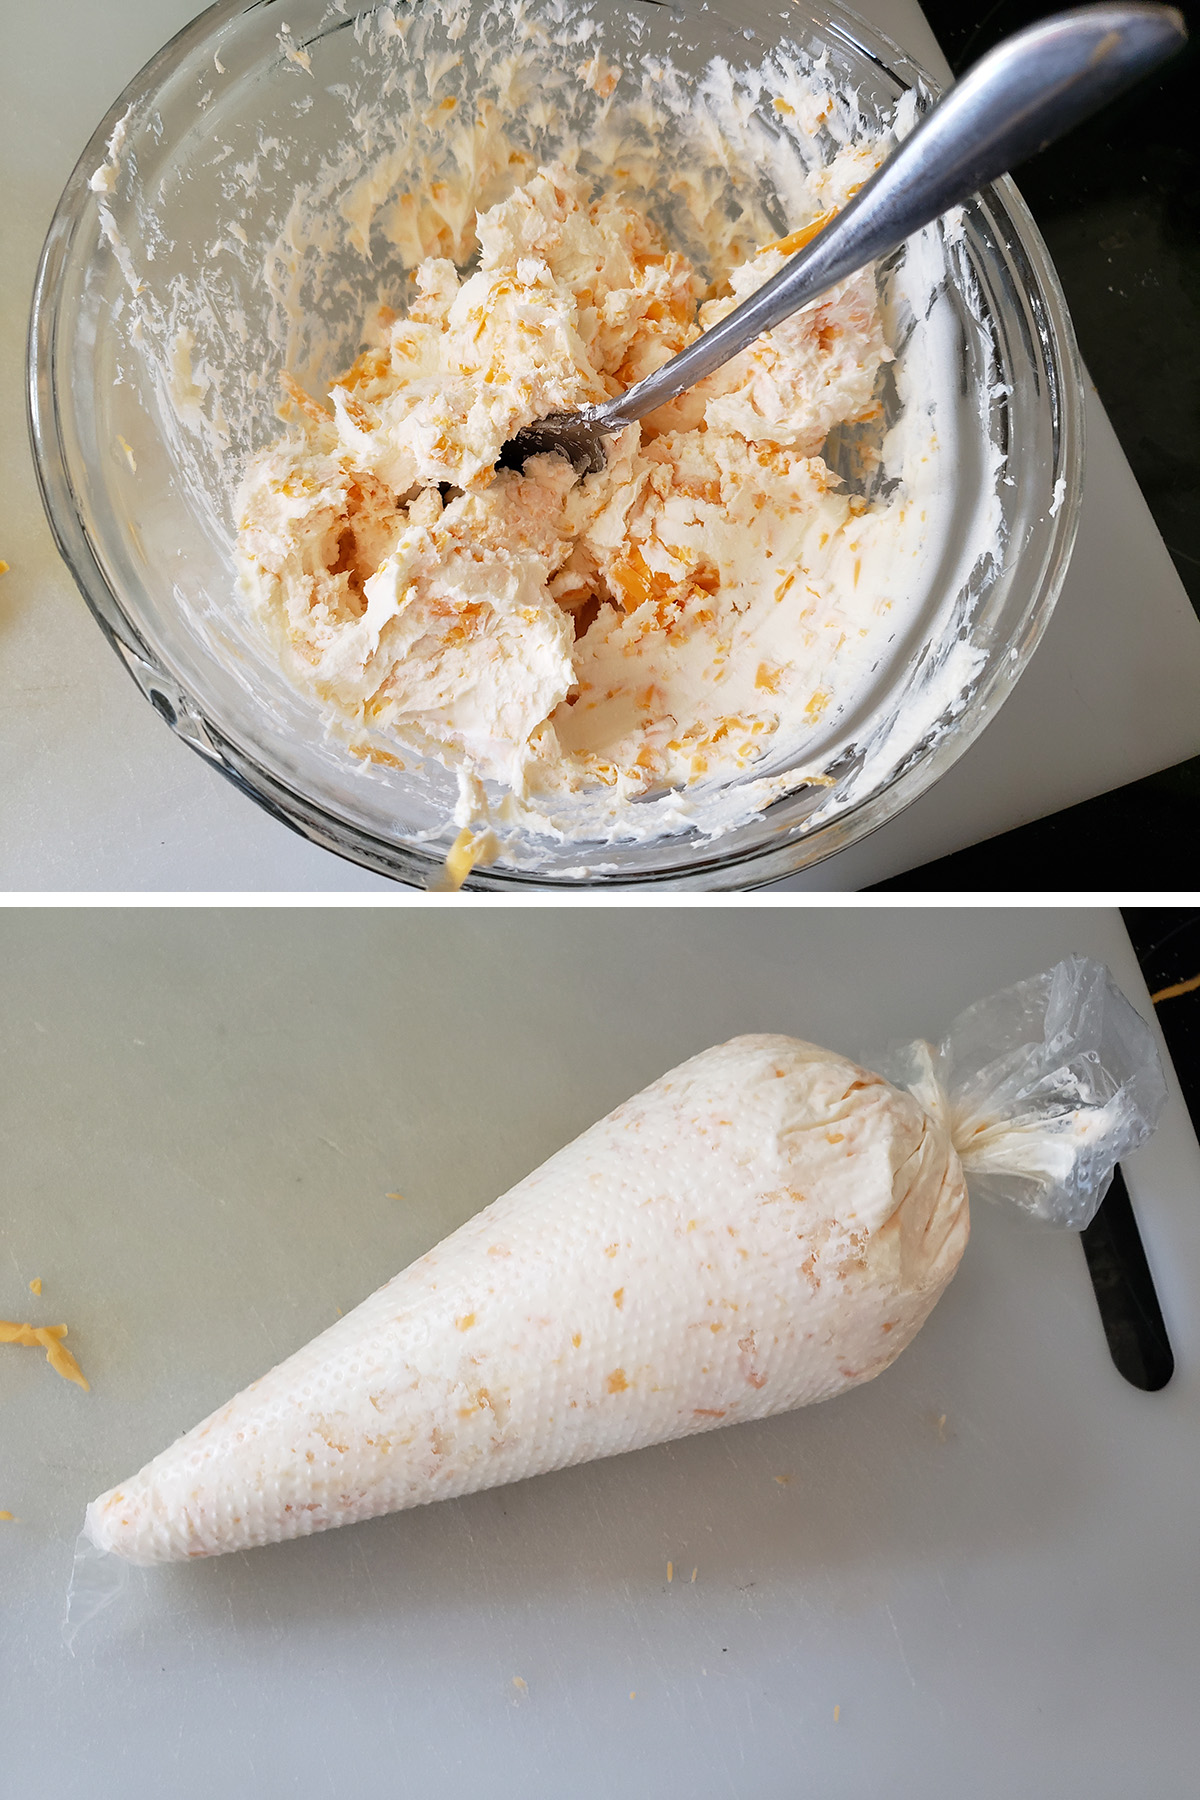 A two part image showing a bowl of cheddar cream cheese filling, and a pastry bag filled with it.